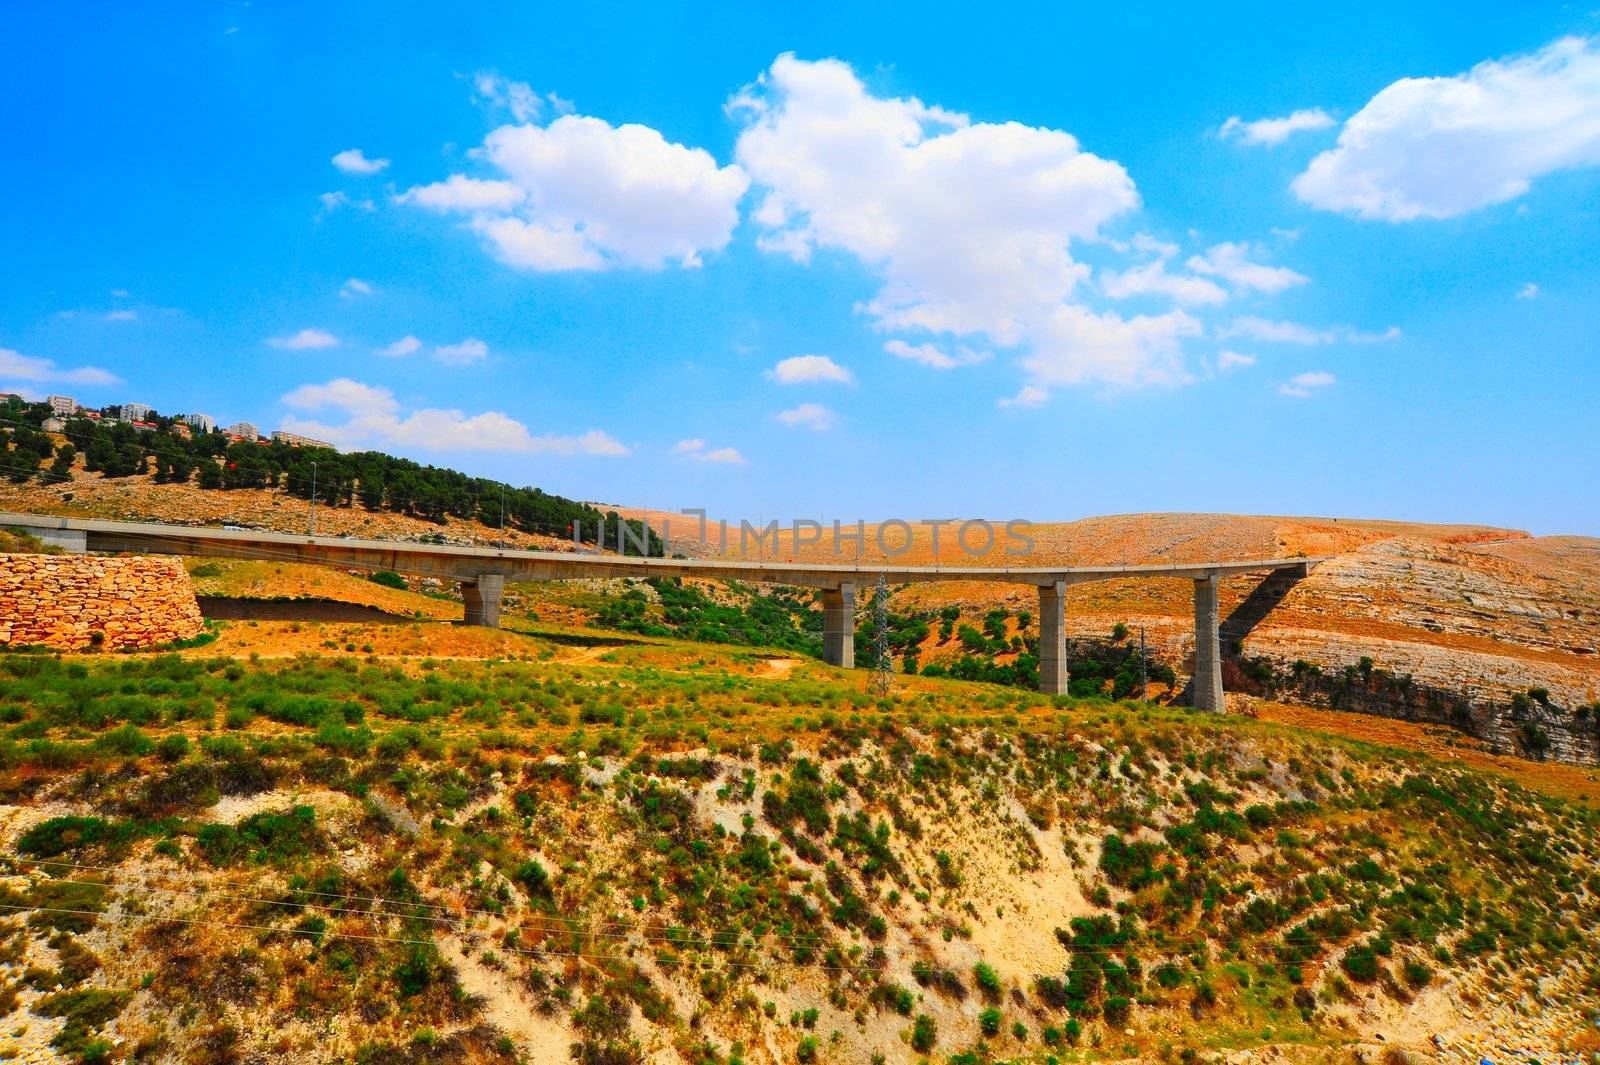 The Modern Bridge Passing Through a Rural Valley in North Galilee, Israel.